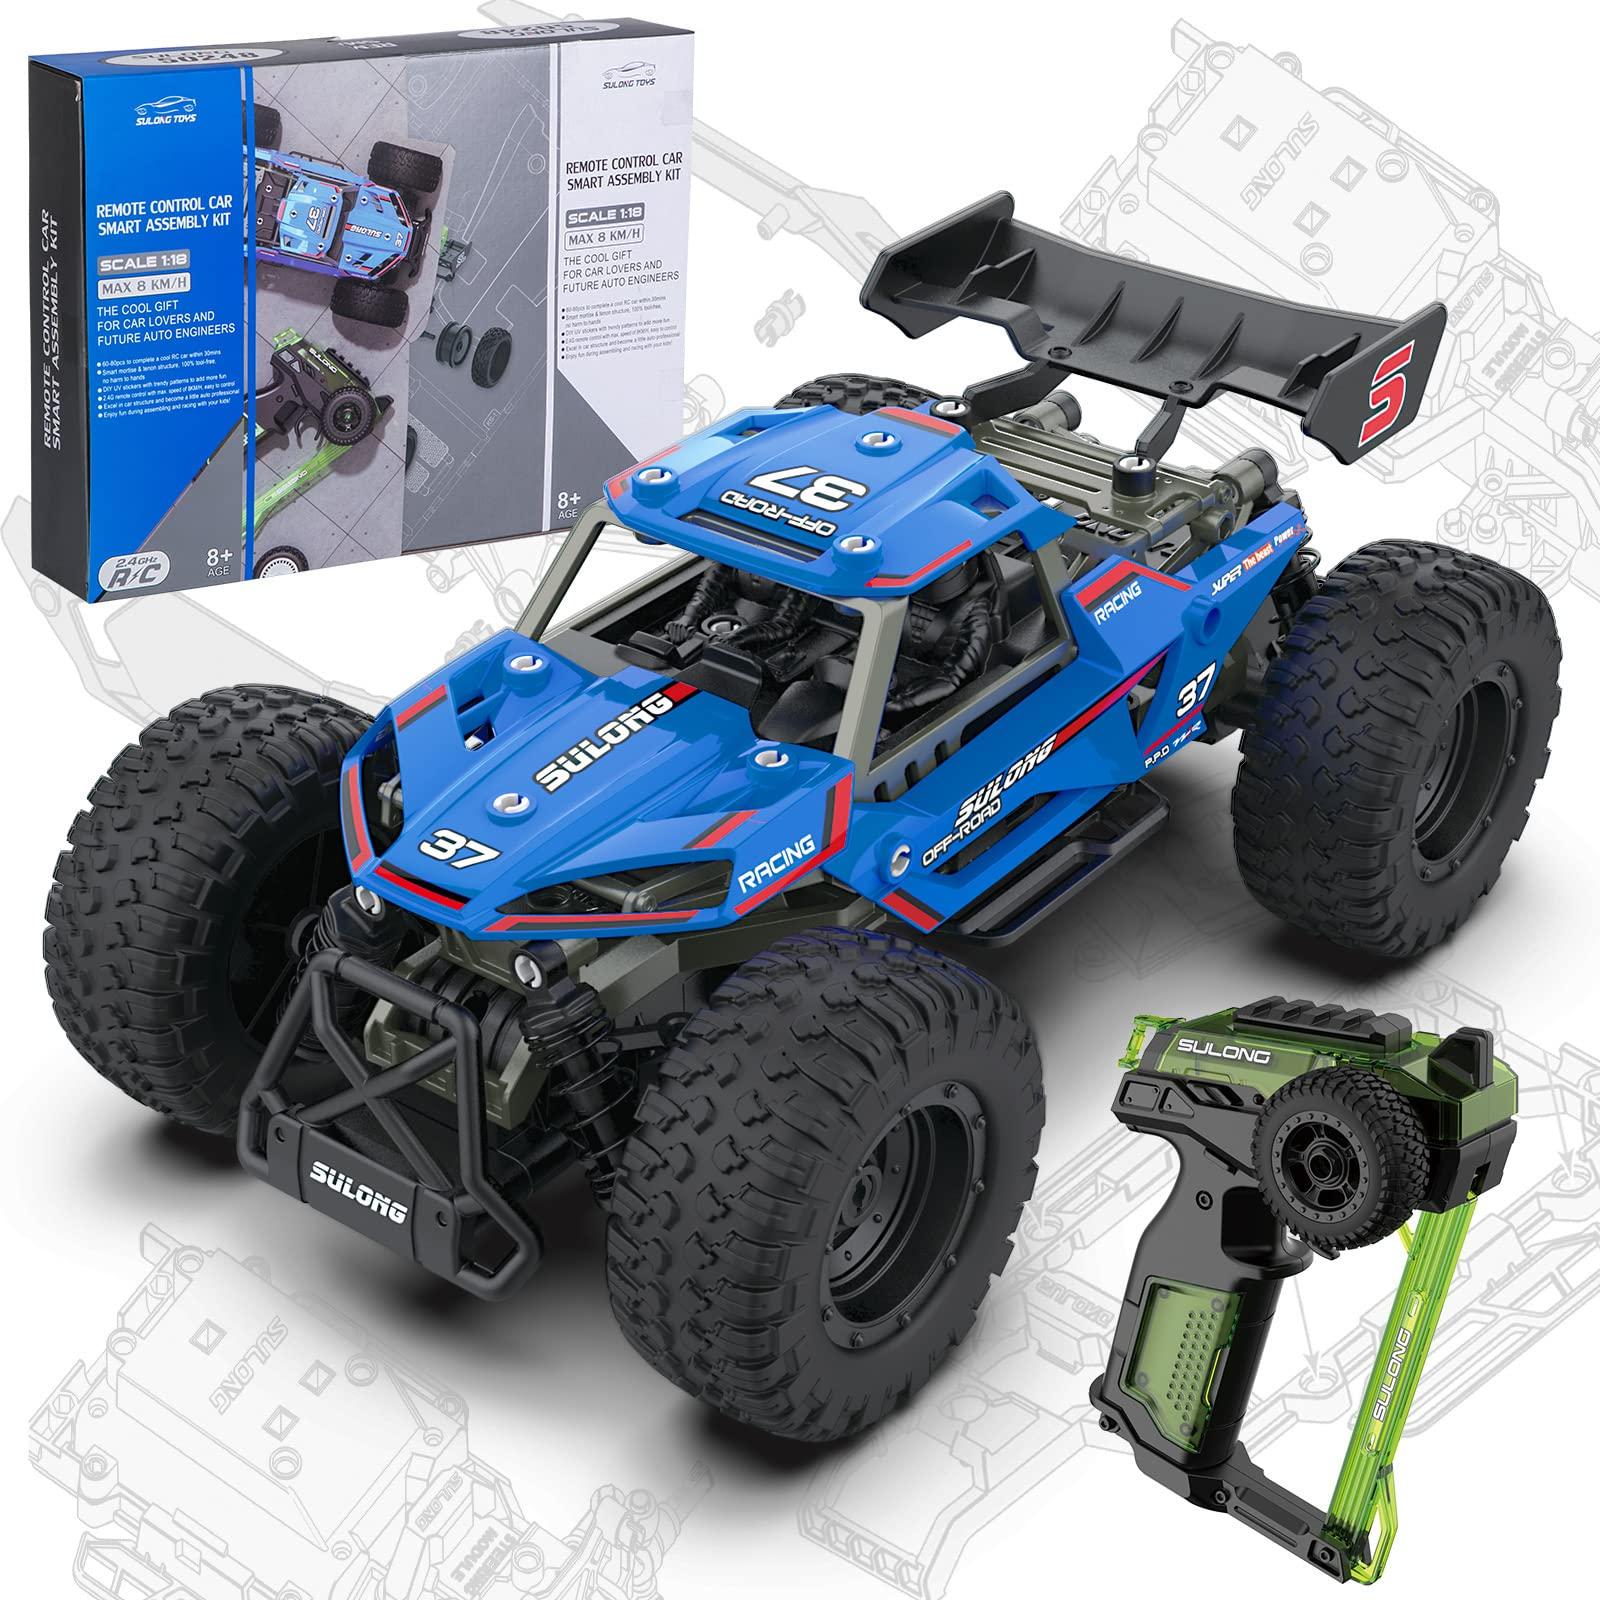 Remote Control Car Kits: RC car kits for different terrains: